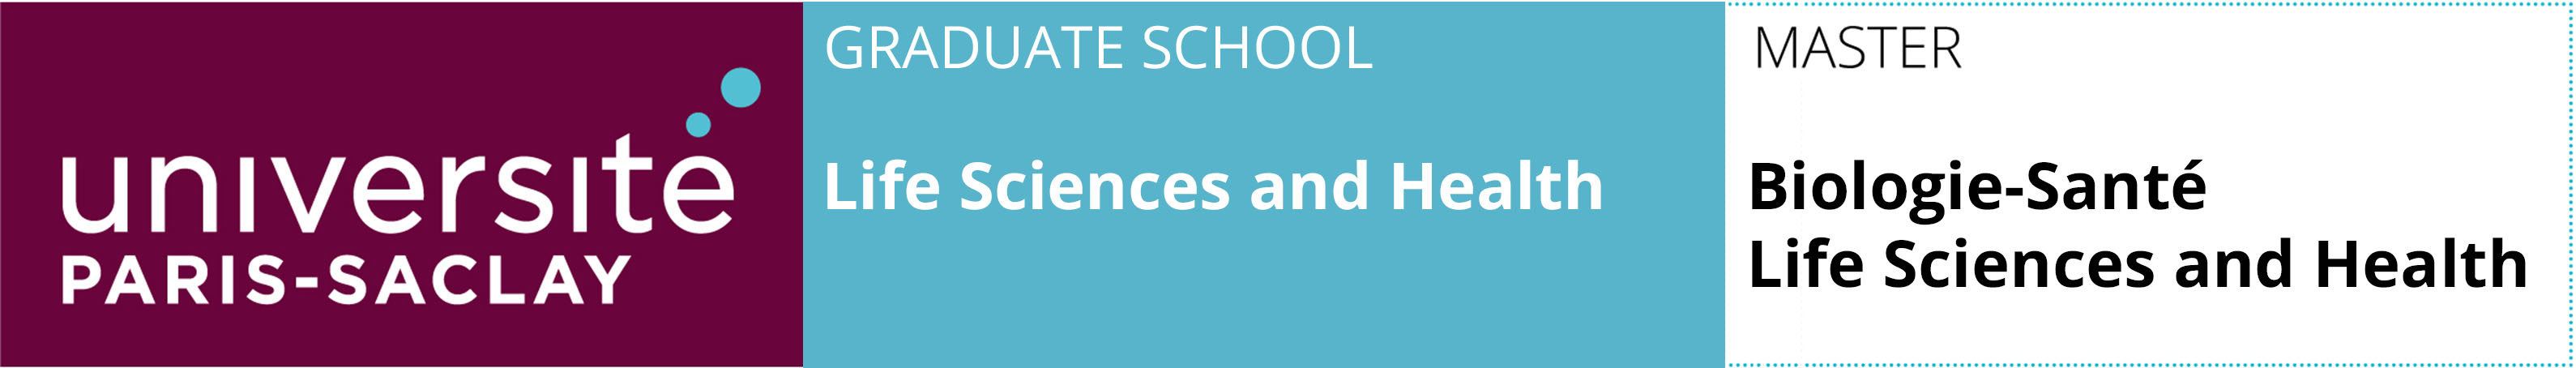 Life Sciences & Health GS banner